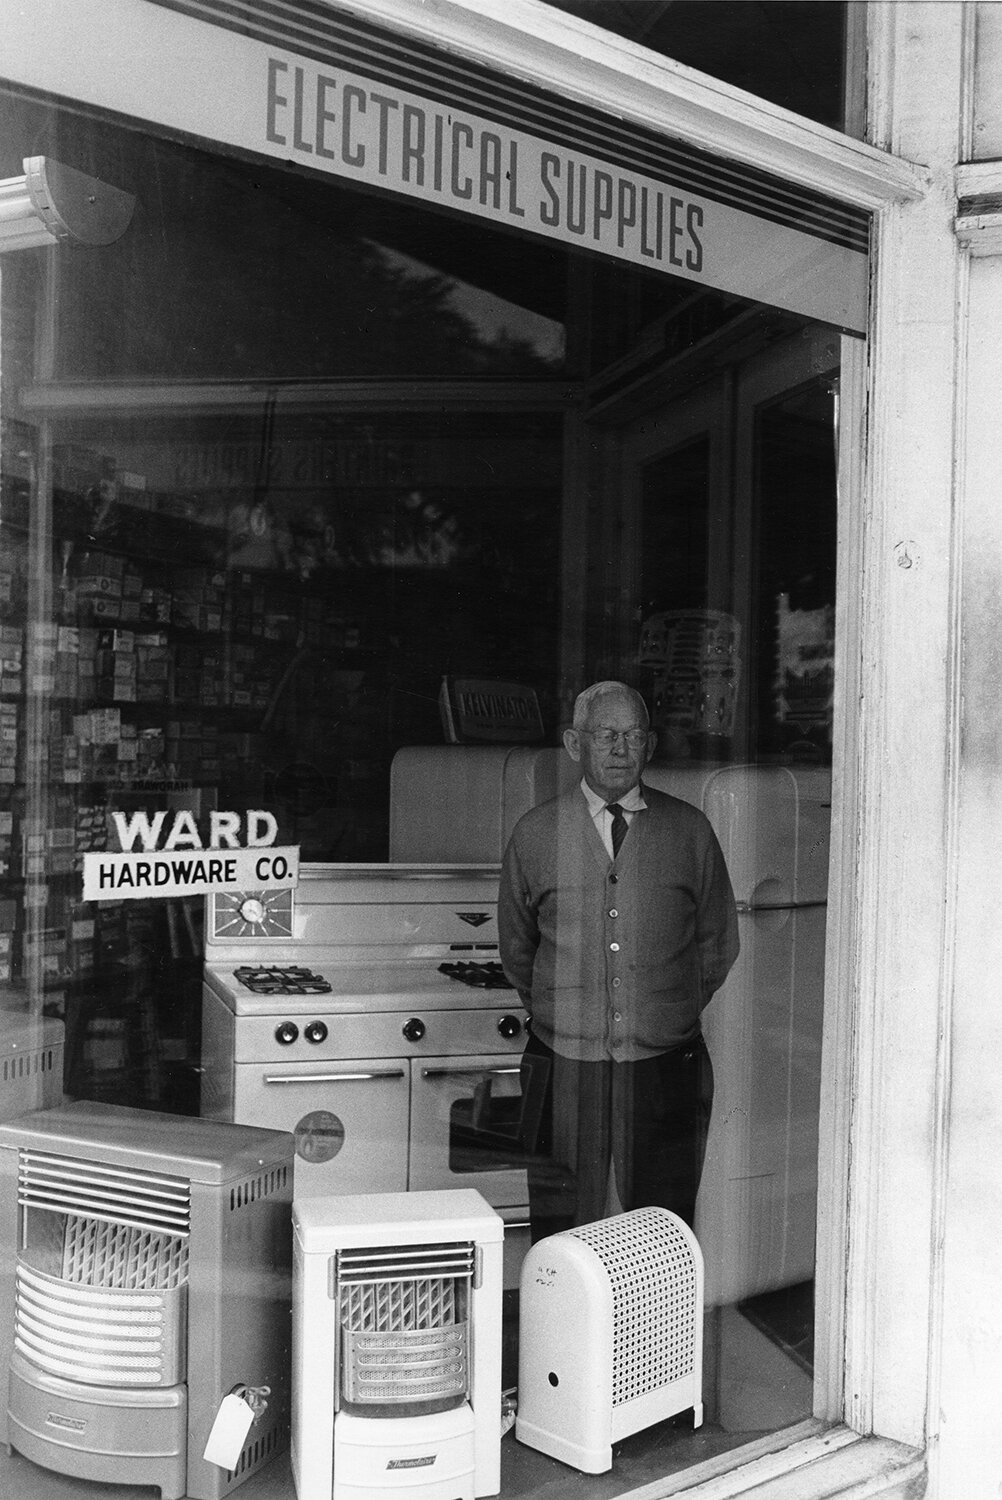   Mr. Ward in his hardware store , 1968 Silver Gelatin Print 10 1/2 × 7 in. (image size) The Do Good Fund, Inc., 2017-34 